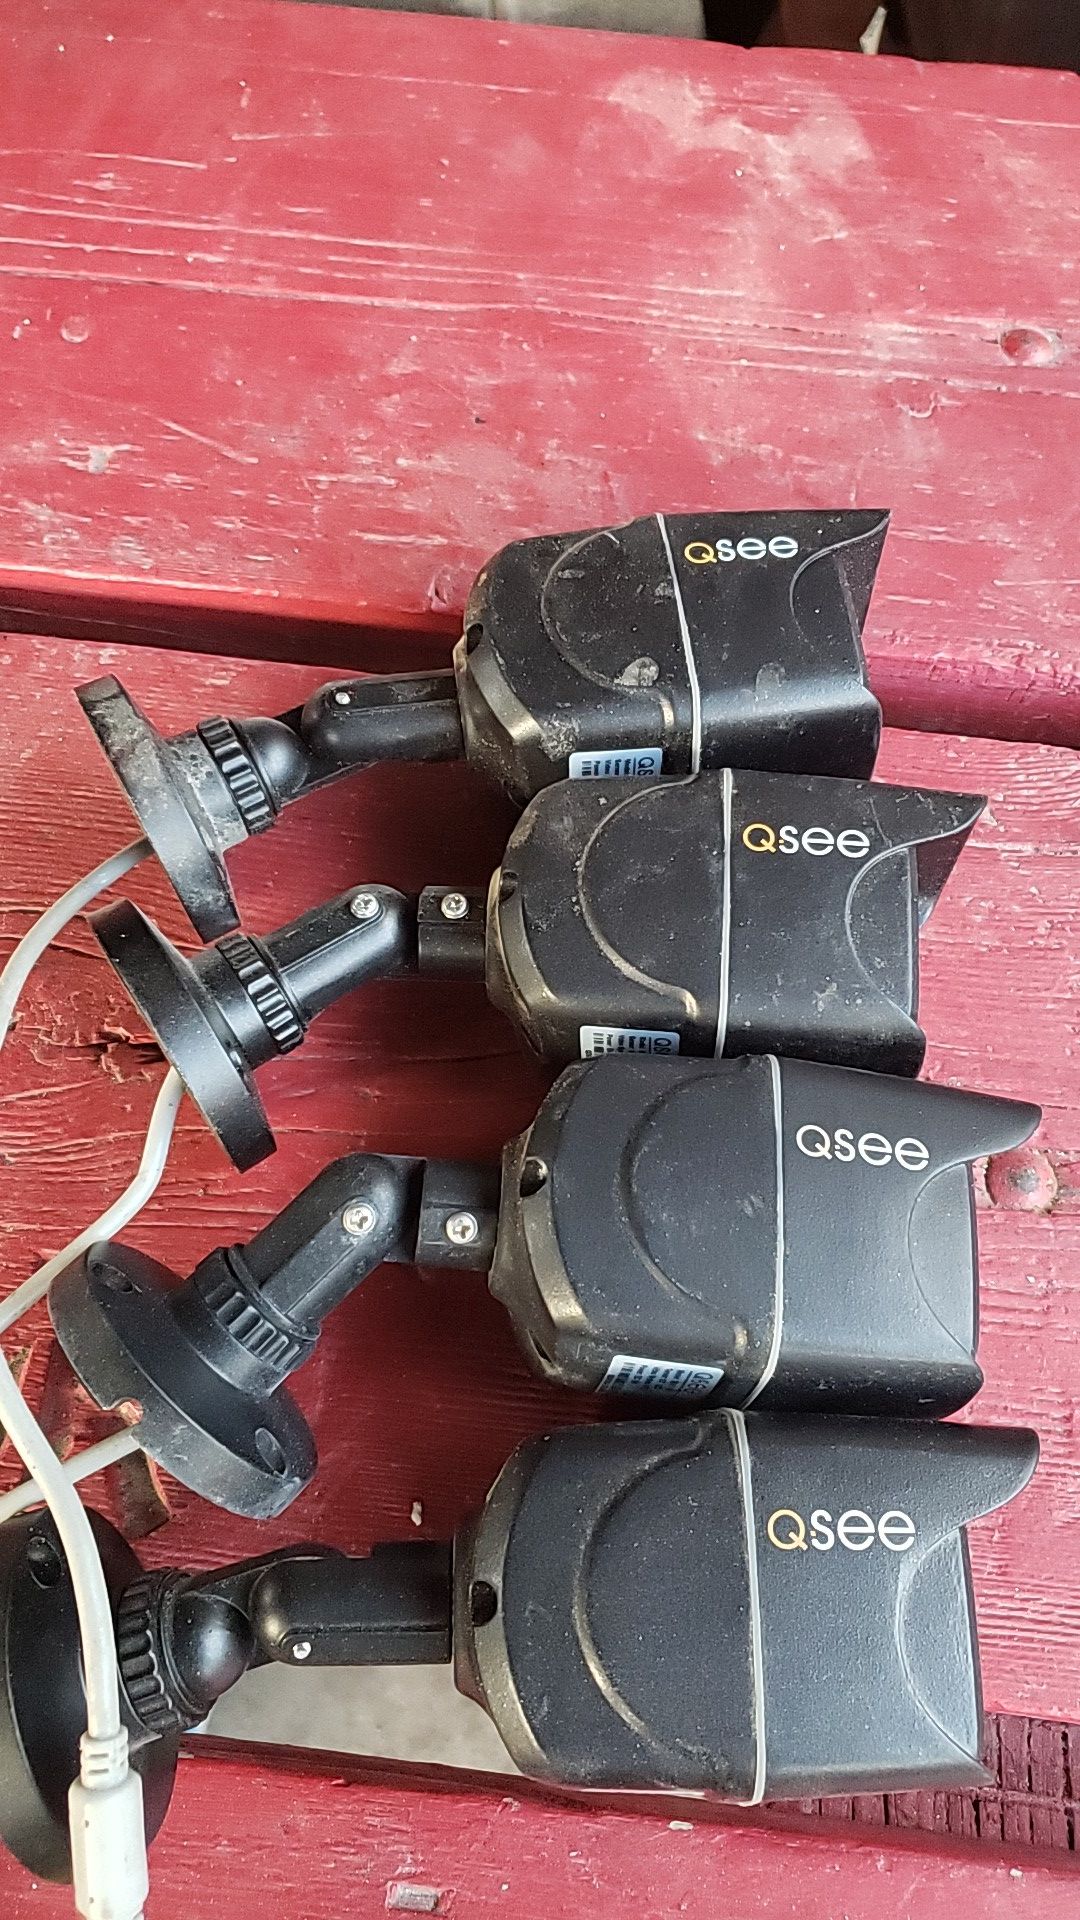 Q see cameras couple new ones, bunch of used ones . Came all from my older Security system